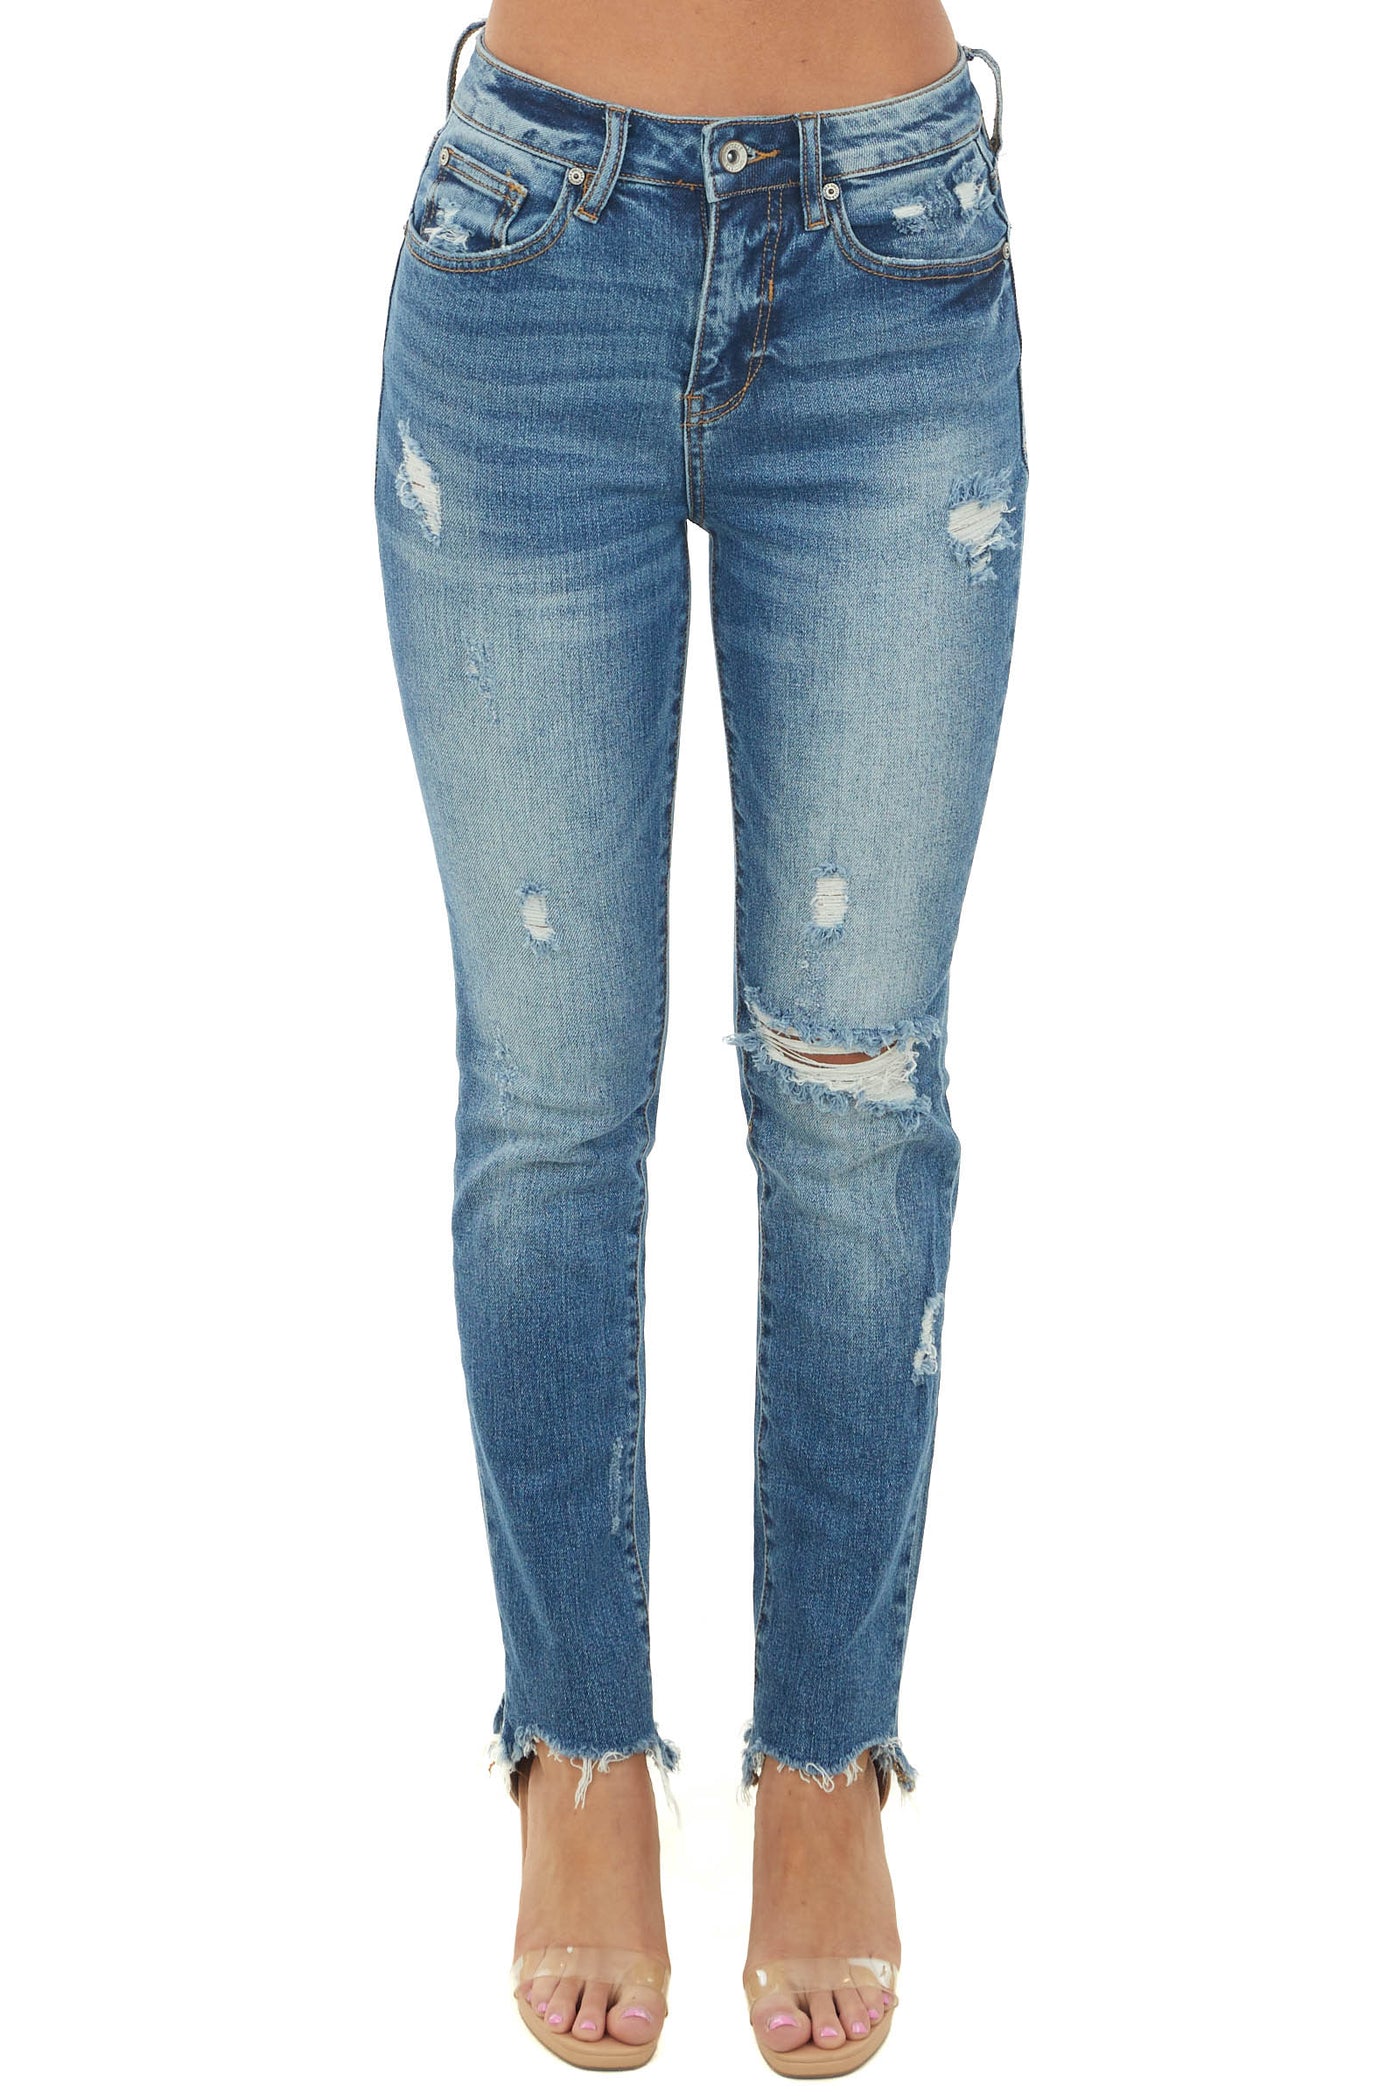 Medium Wash Frayed High Rise Relaxed Jeans